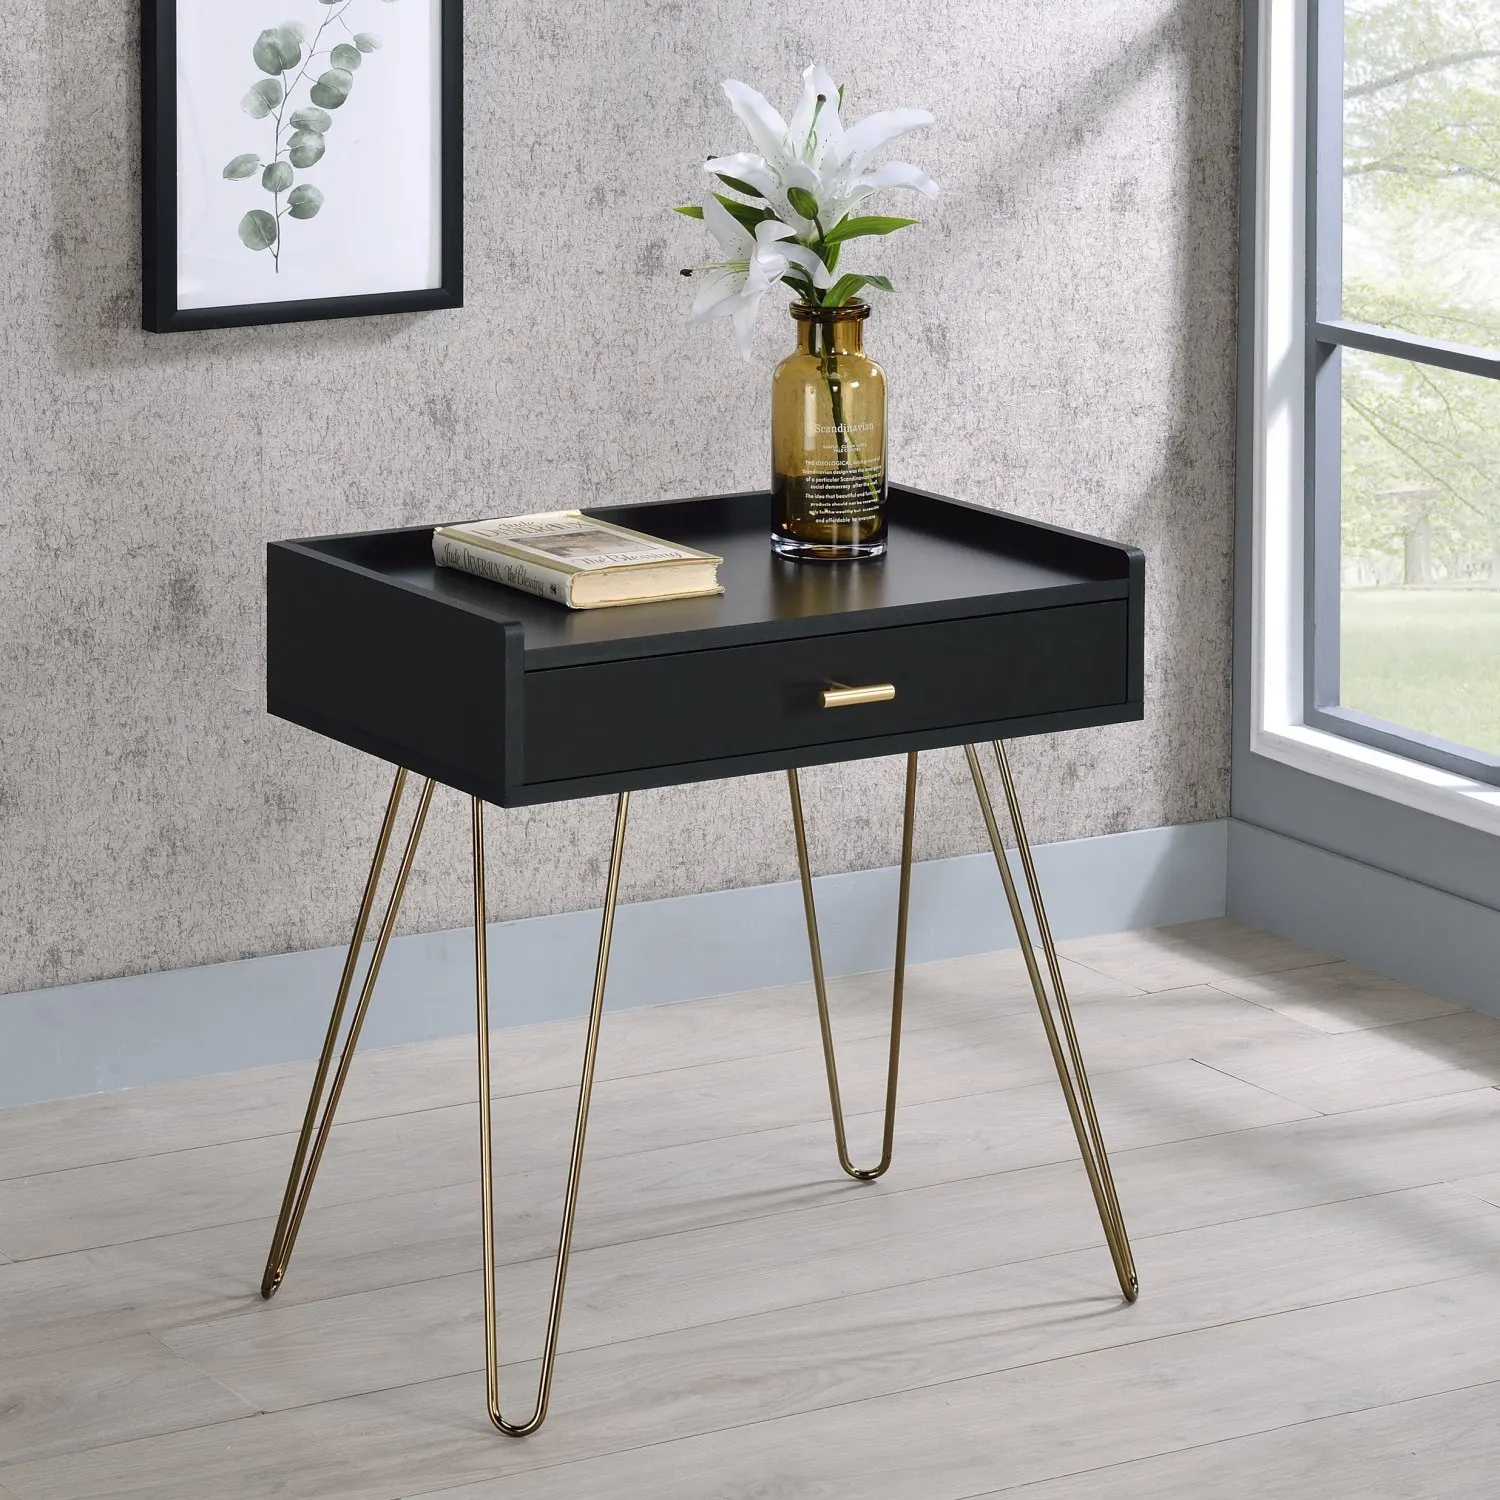 

Stylish Hailey Black and Gold Wooden Storage End Table with Elegant Design for Your Home Décor Needs and Organizational Space -